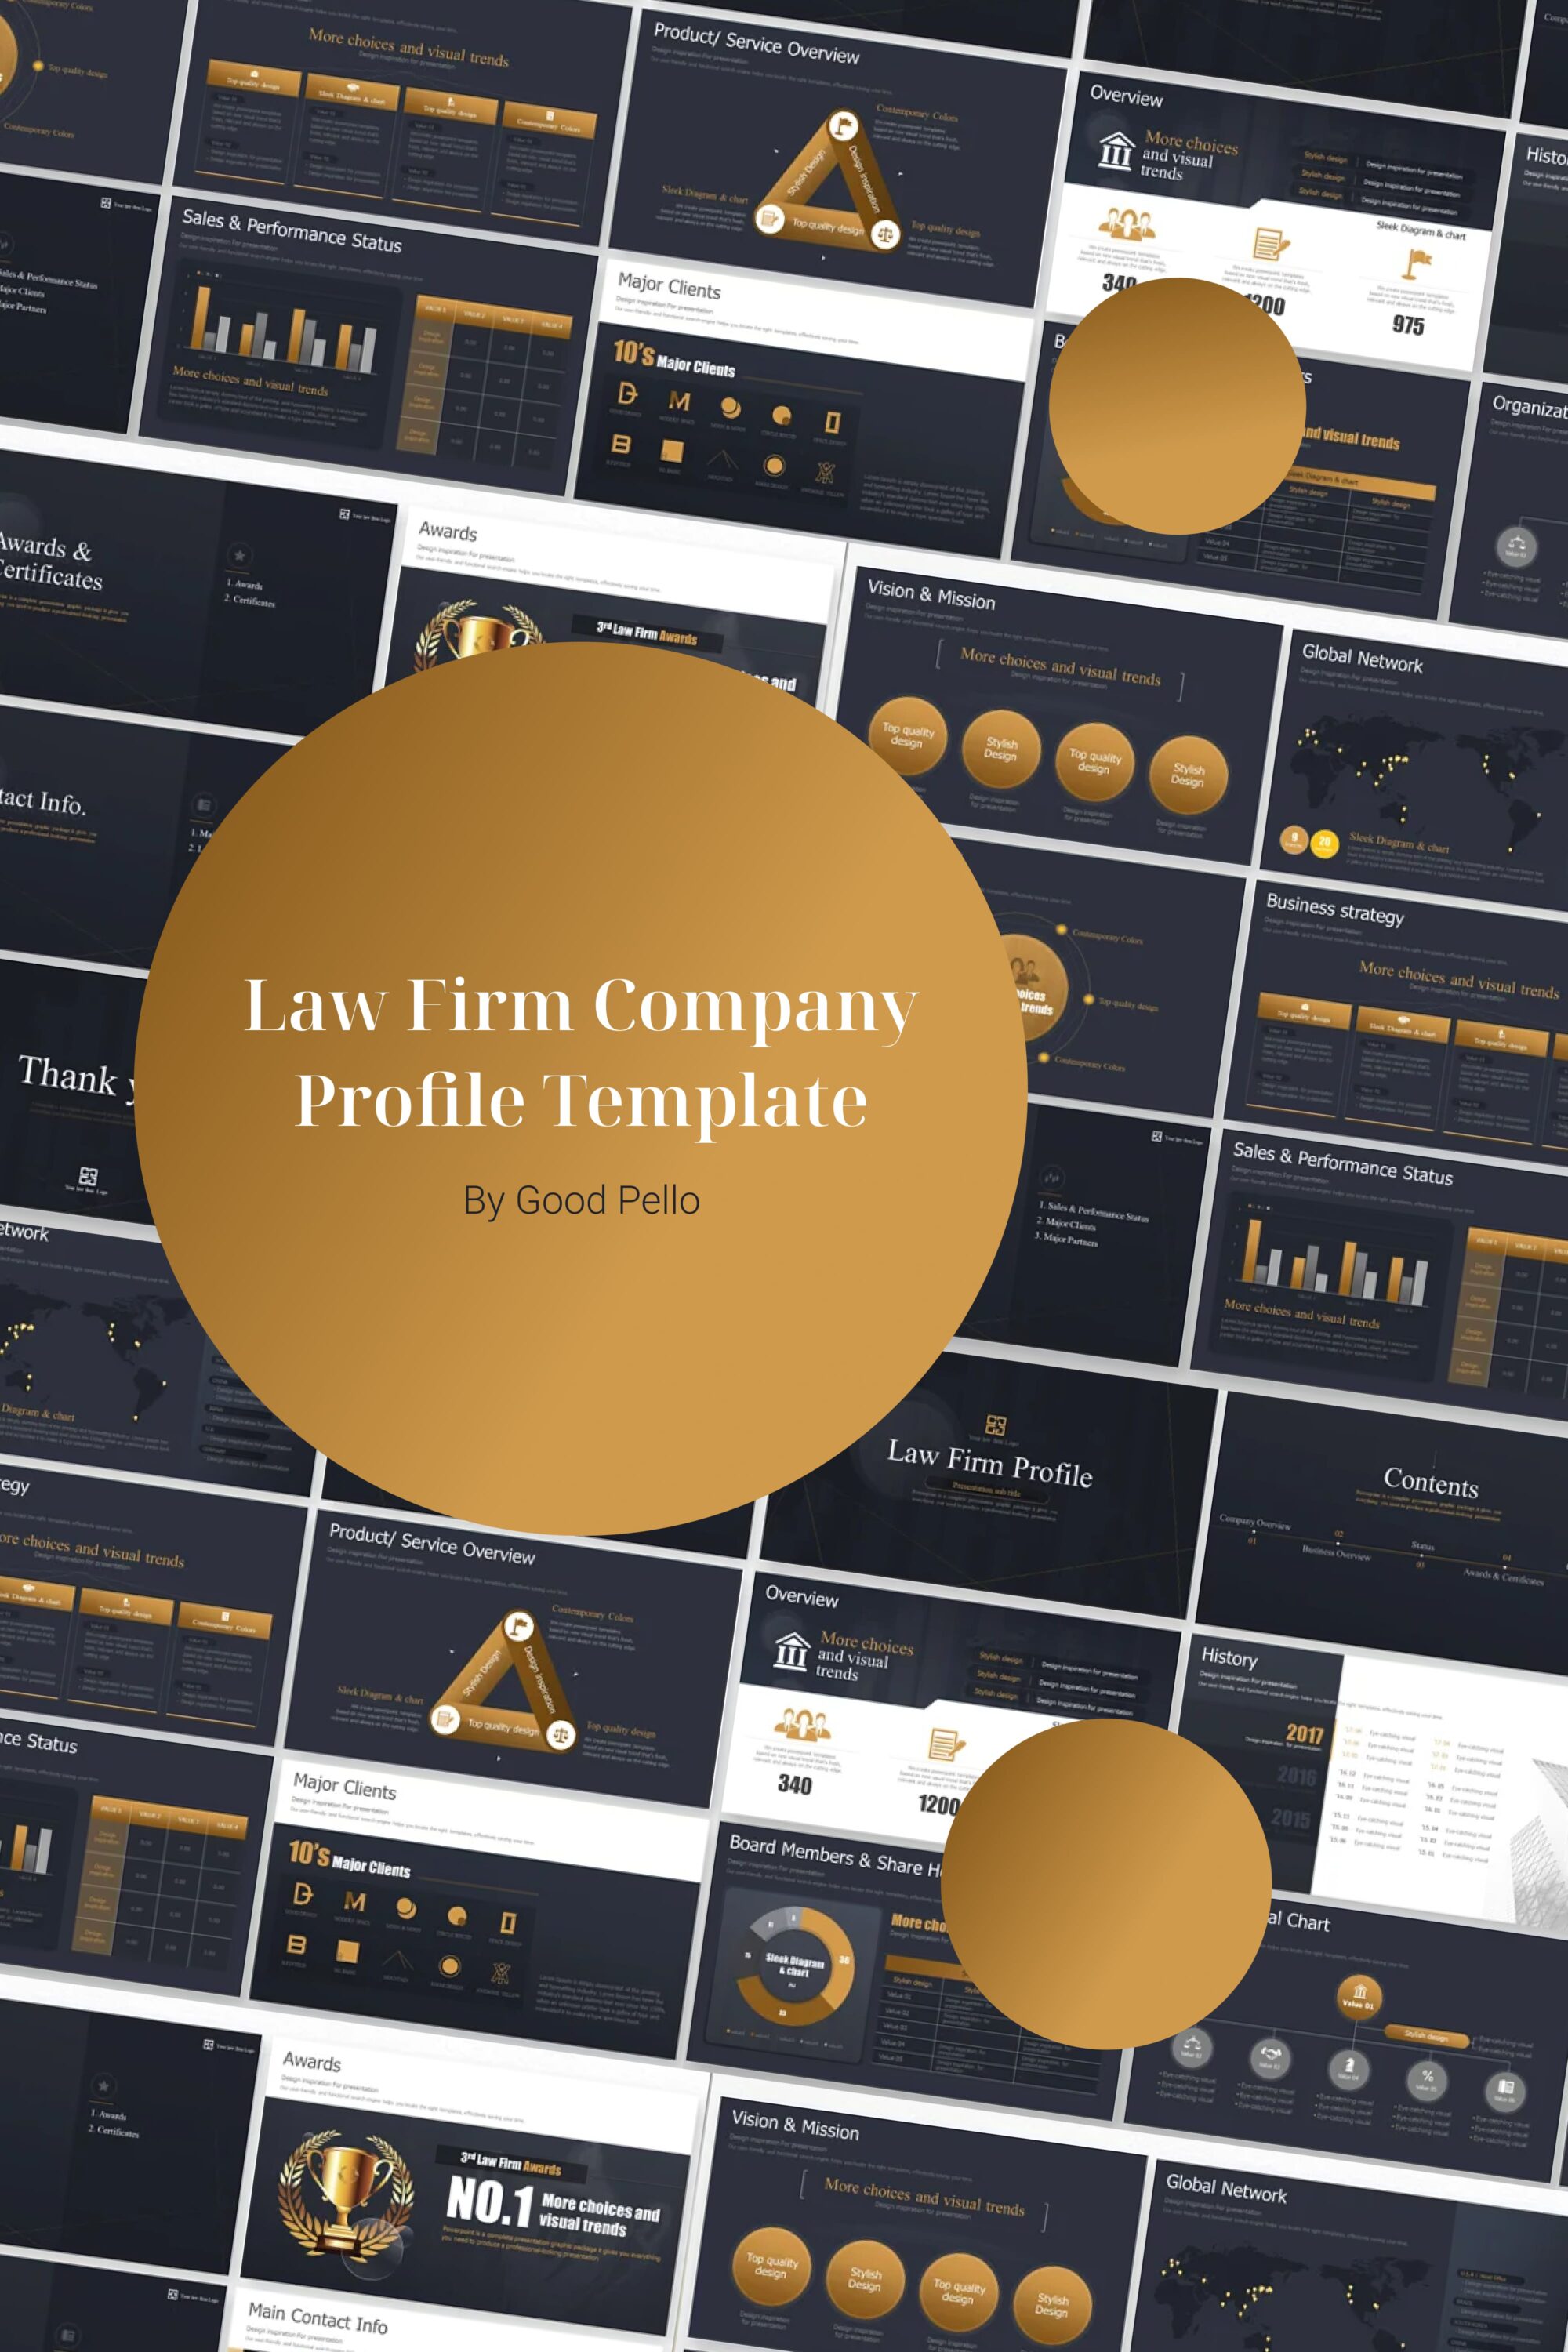 law firm company profile template pint3.